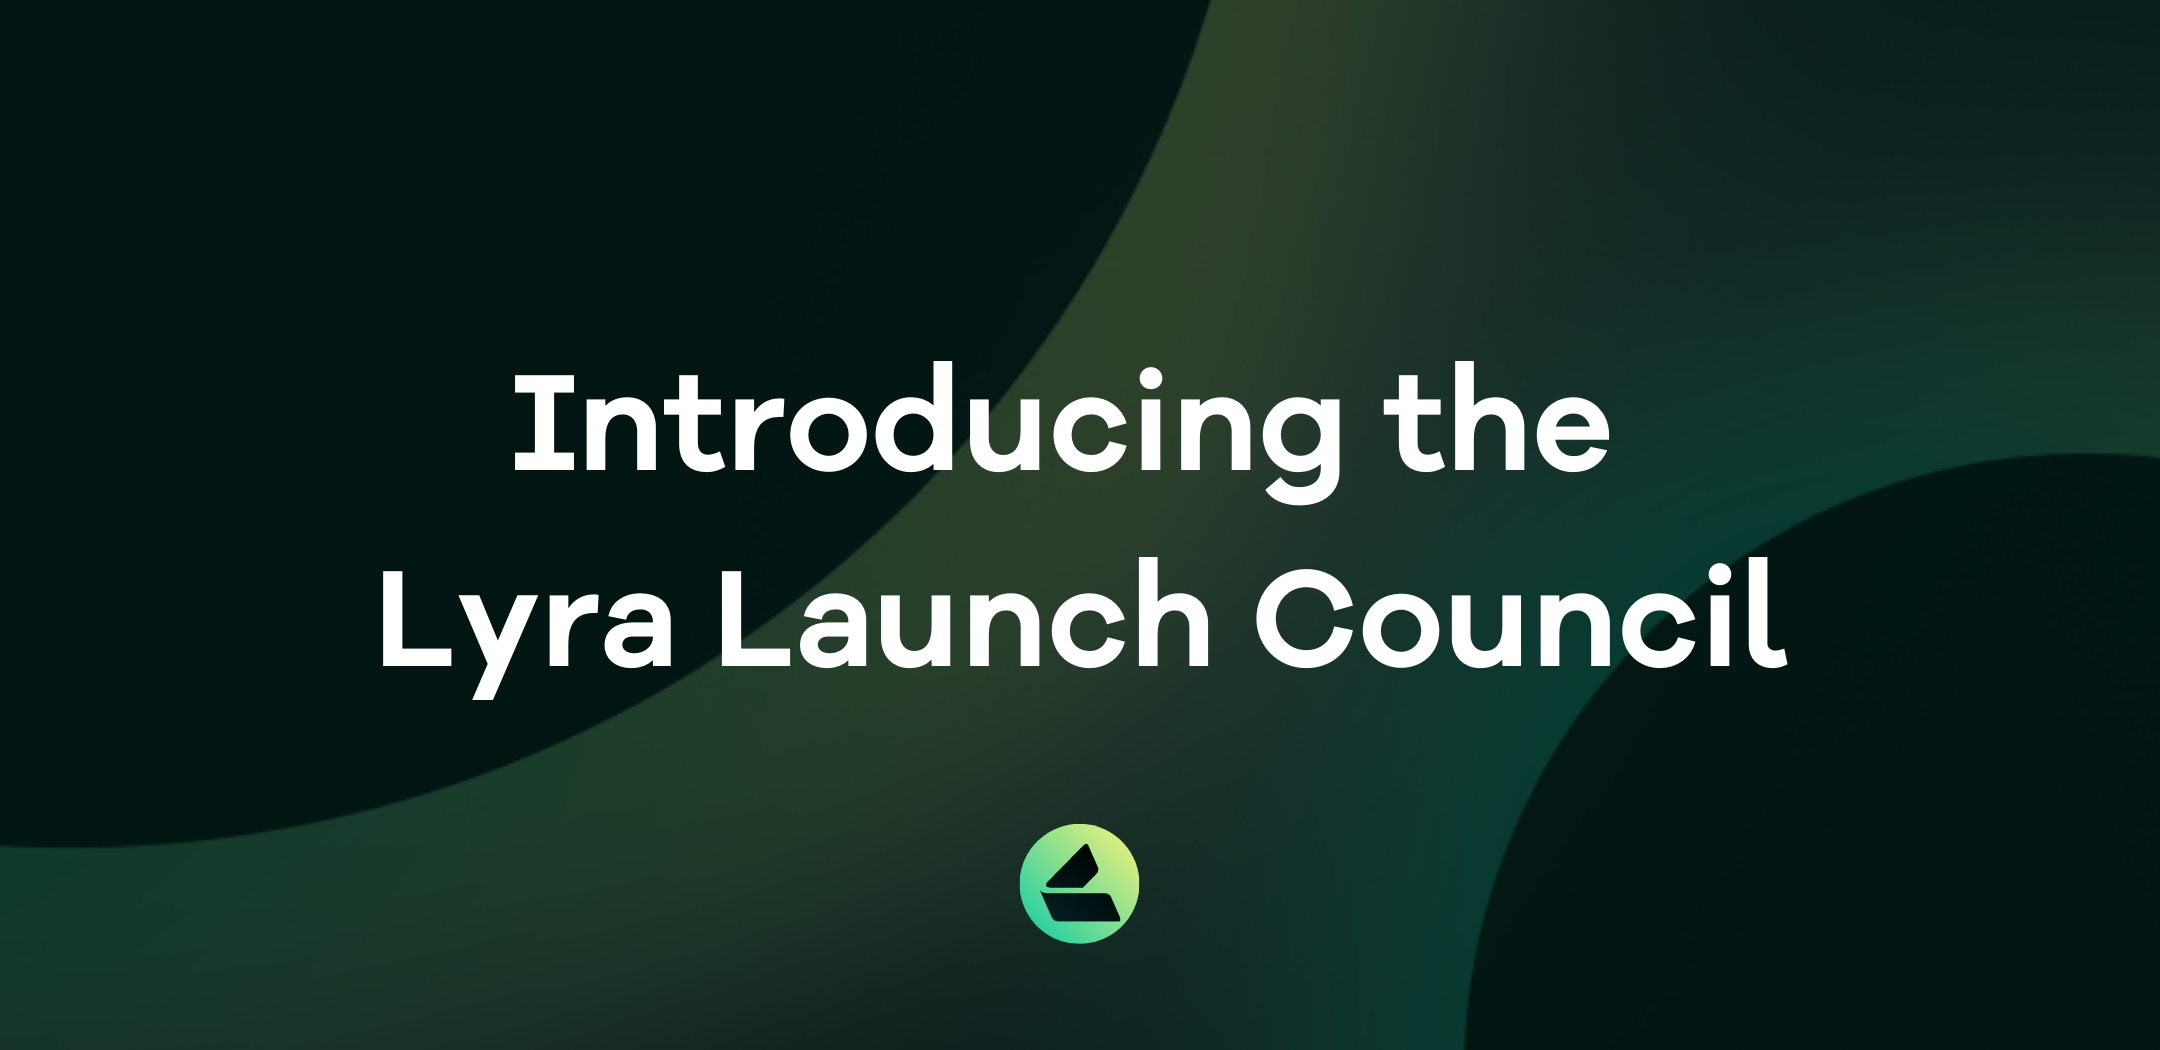 Introducing the Lyra Launch Council